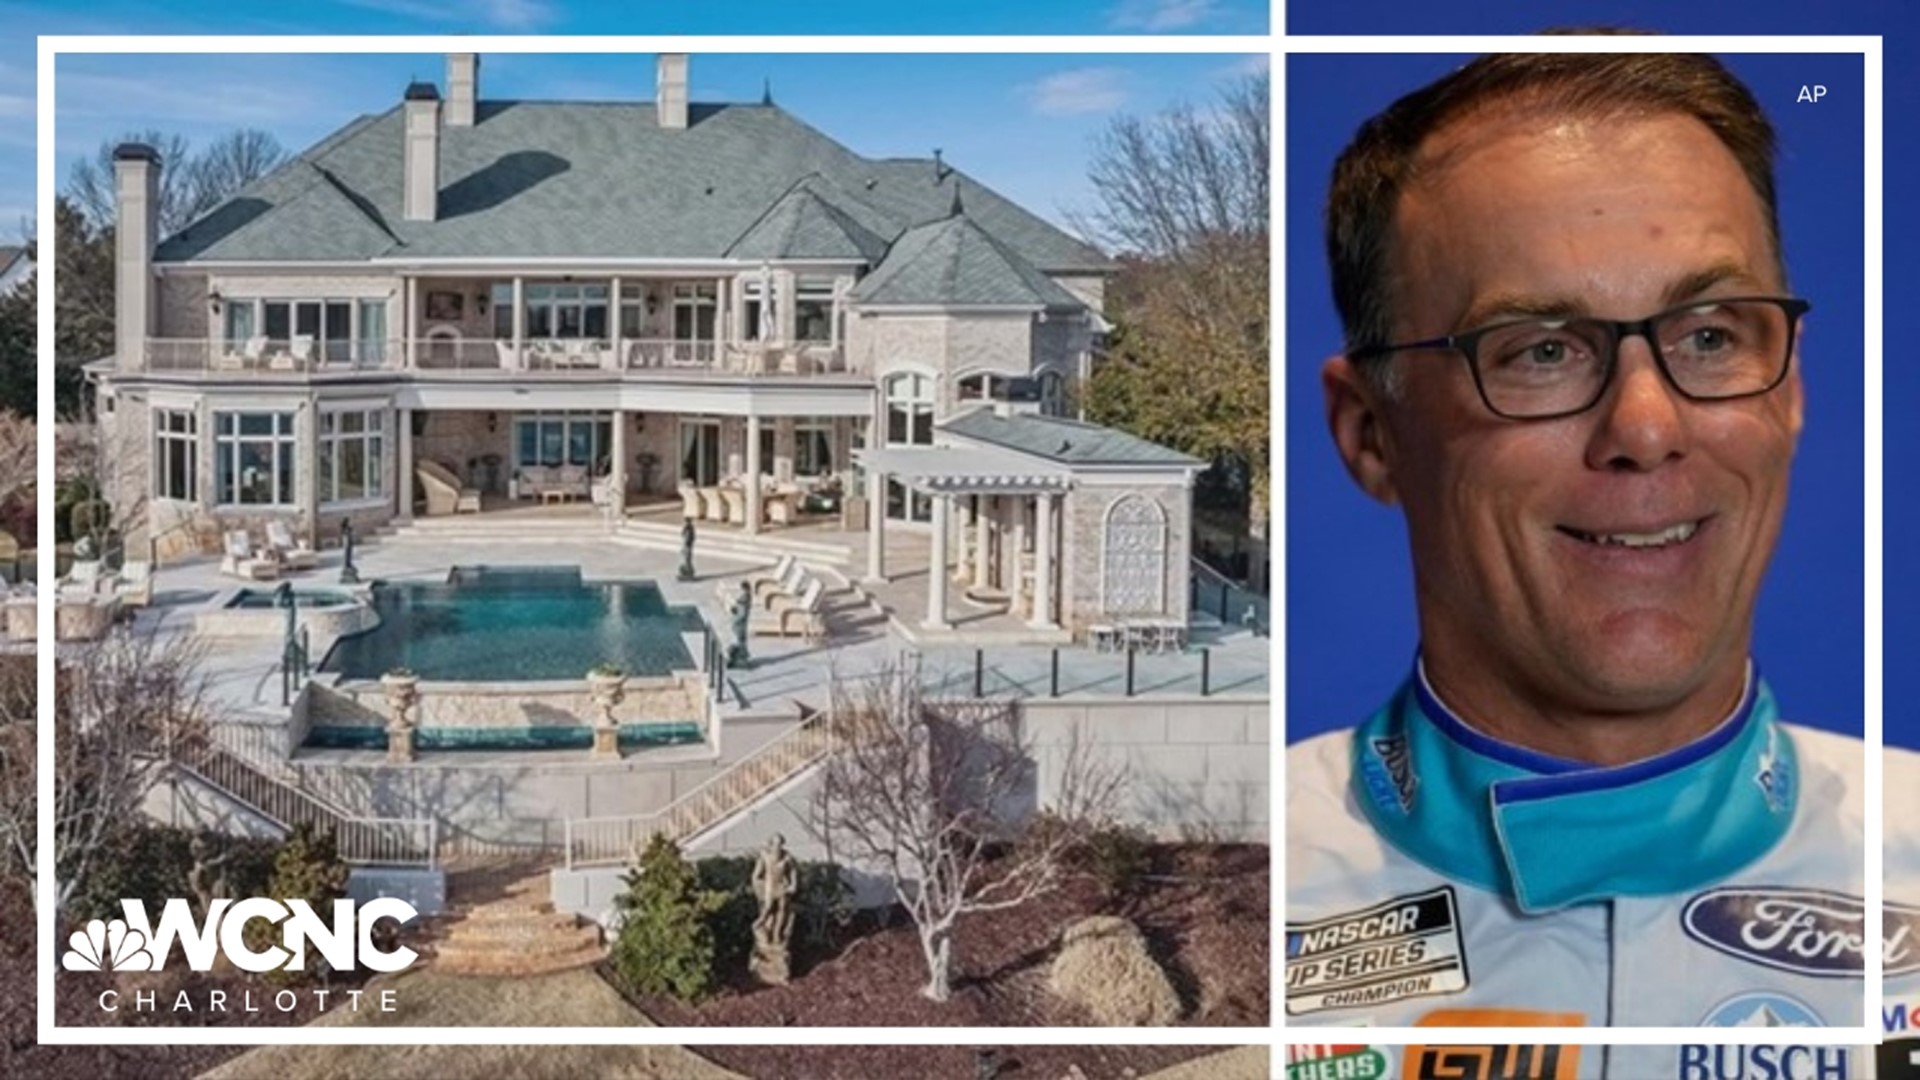 Retired NASCAR driver, Kevin Harvick, is the proud owner of Ricky Bobby's mansion from Talladega Nights. Harvick paid $7 million for the famous Lake Norman mansion.